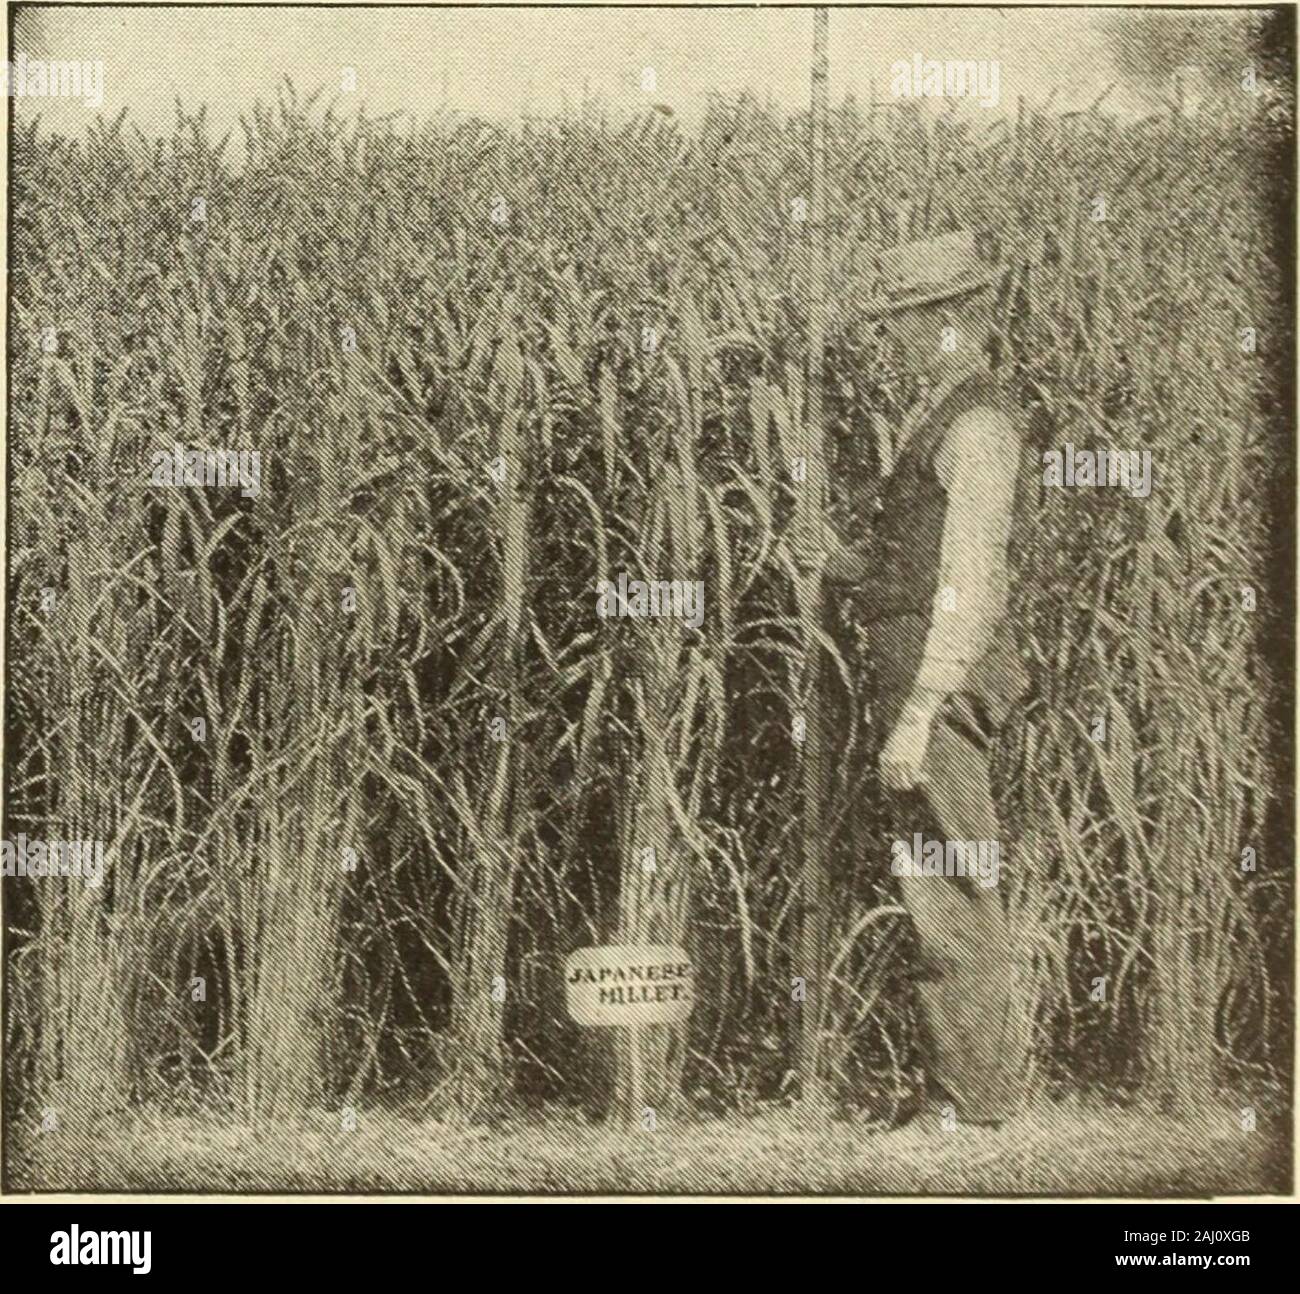 Johnson's garden & farm manual : 1913 . 4 bushels to the acre in May or June. Pricevaries. Qt., lOc; bush., lbs., about $1.75. Pearl Millet, Pencillaria Valuable green